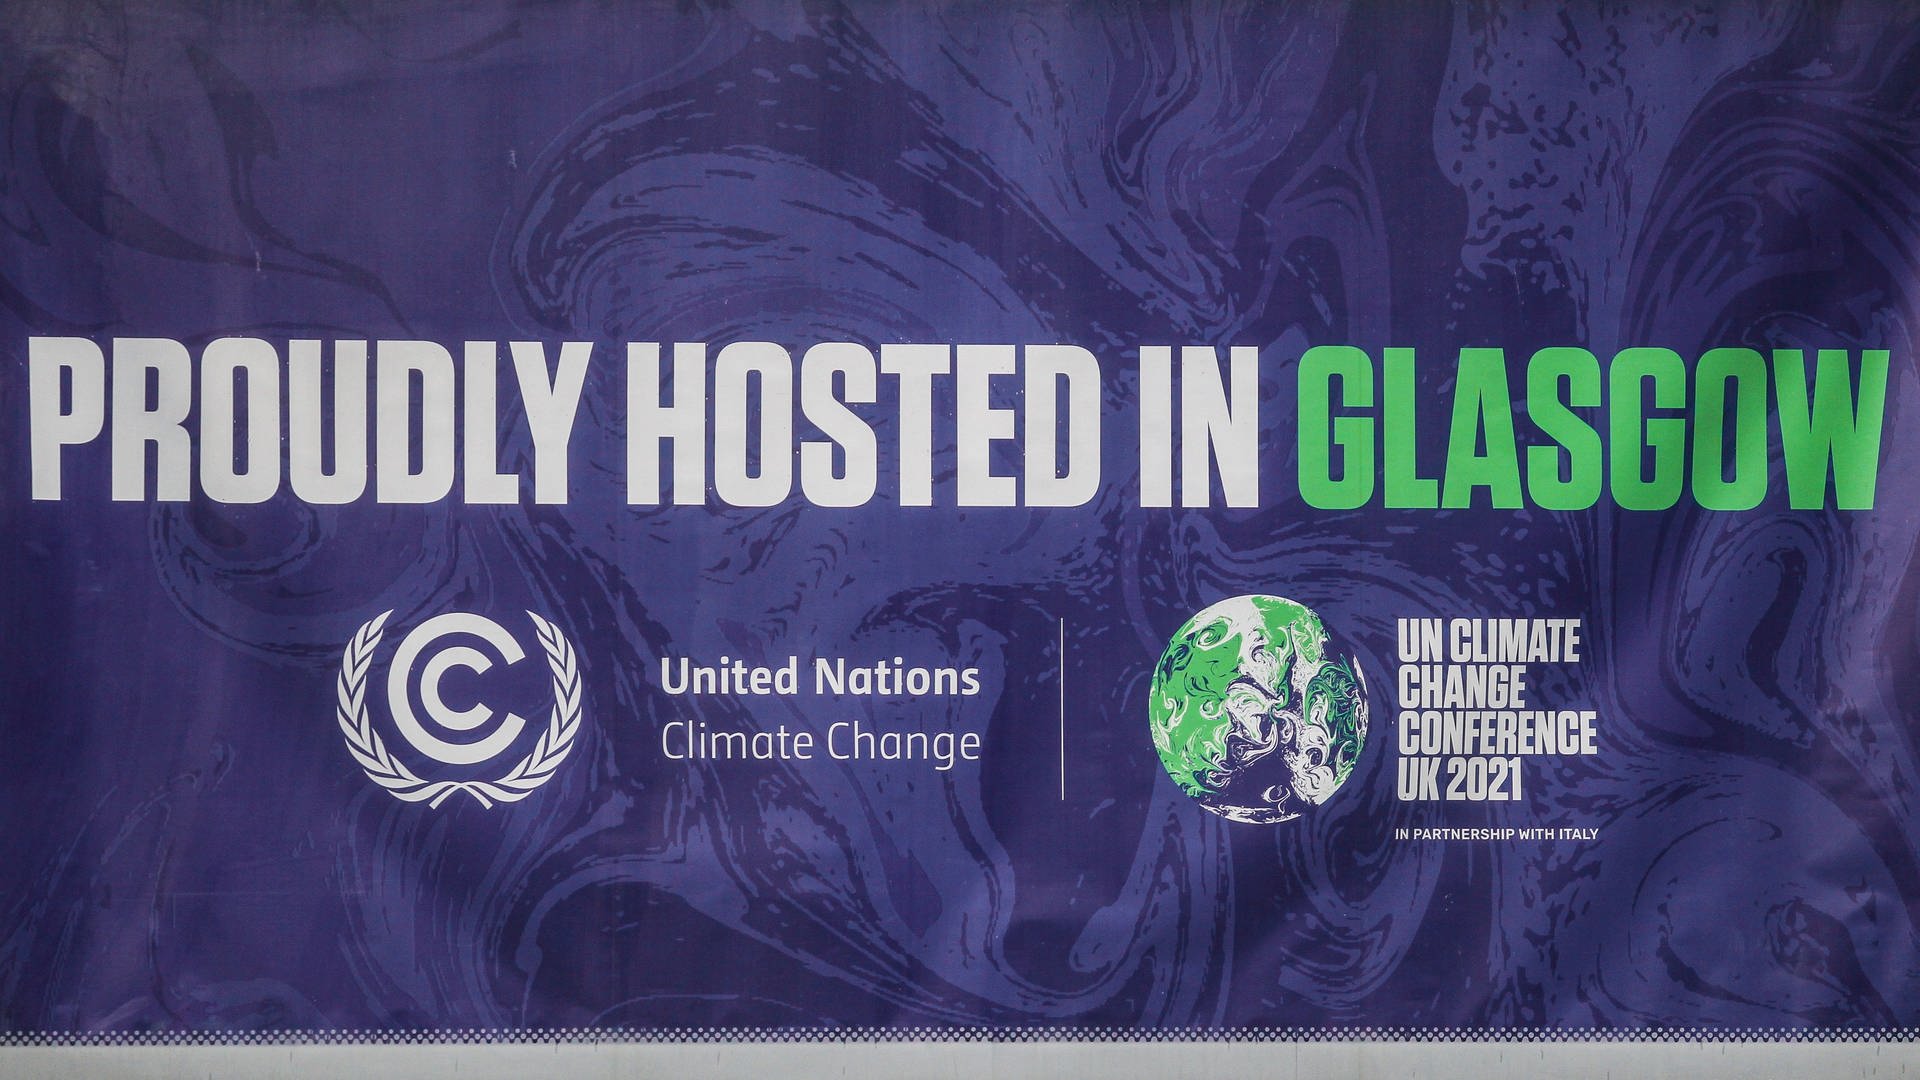 A COP26 branded billboard near the Scottish Event Campus on September 1, 2021 in Glasgow, Scotland.